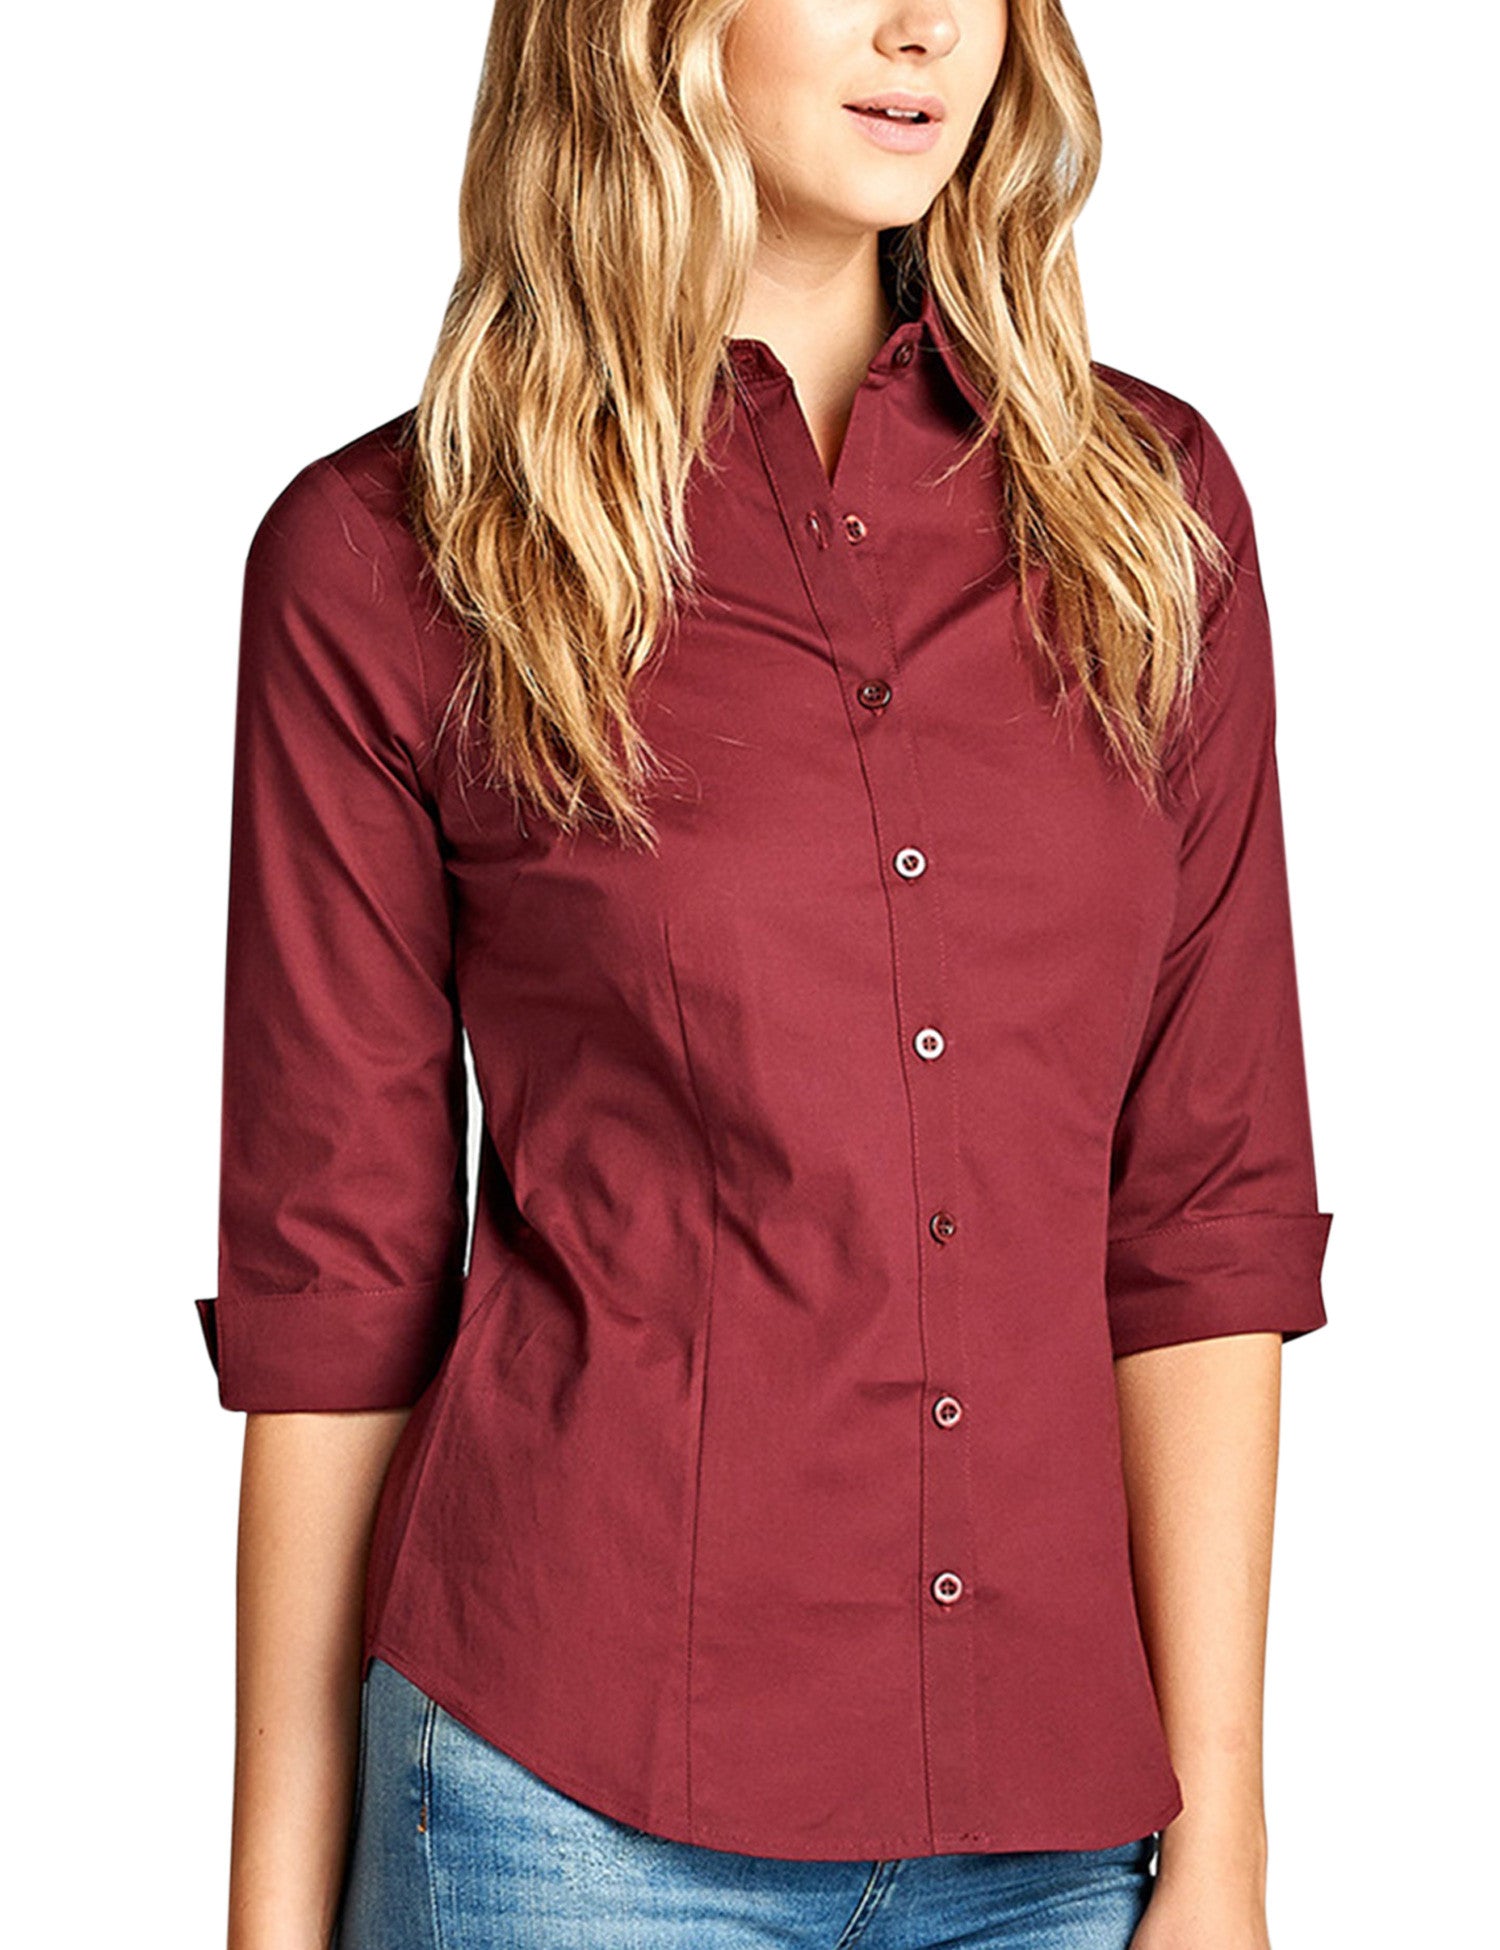 Womens Classic Solid 3 4 Sleeve Button Down Blouse Dress Shirt KOGMO